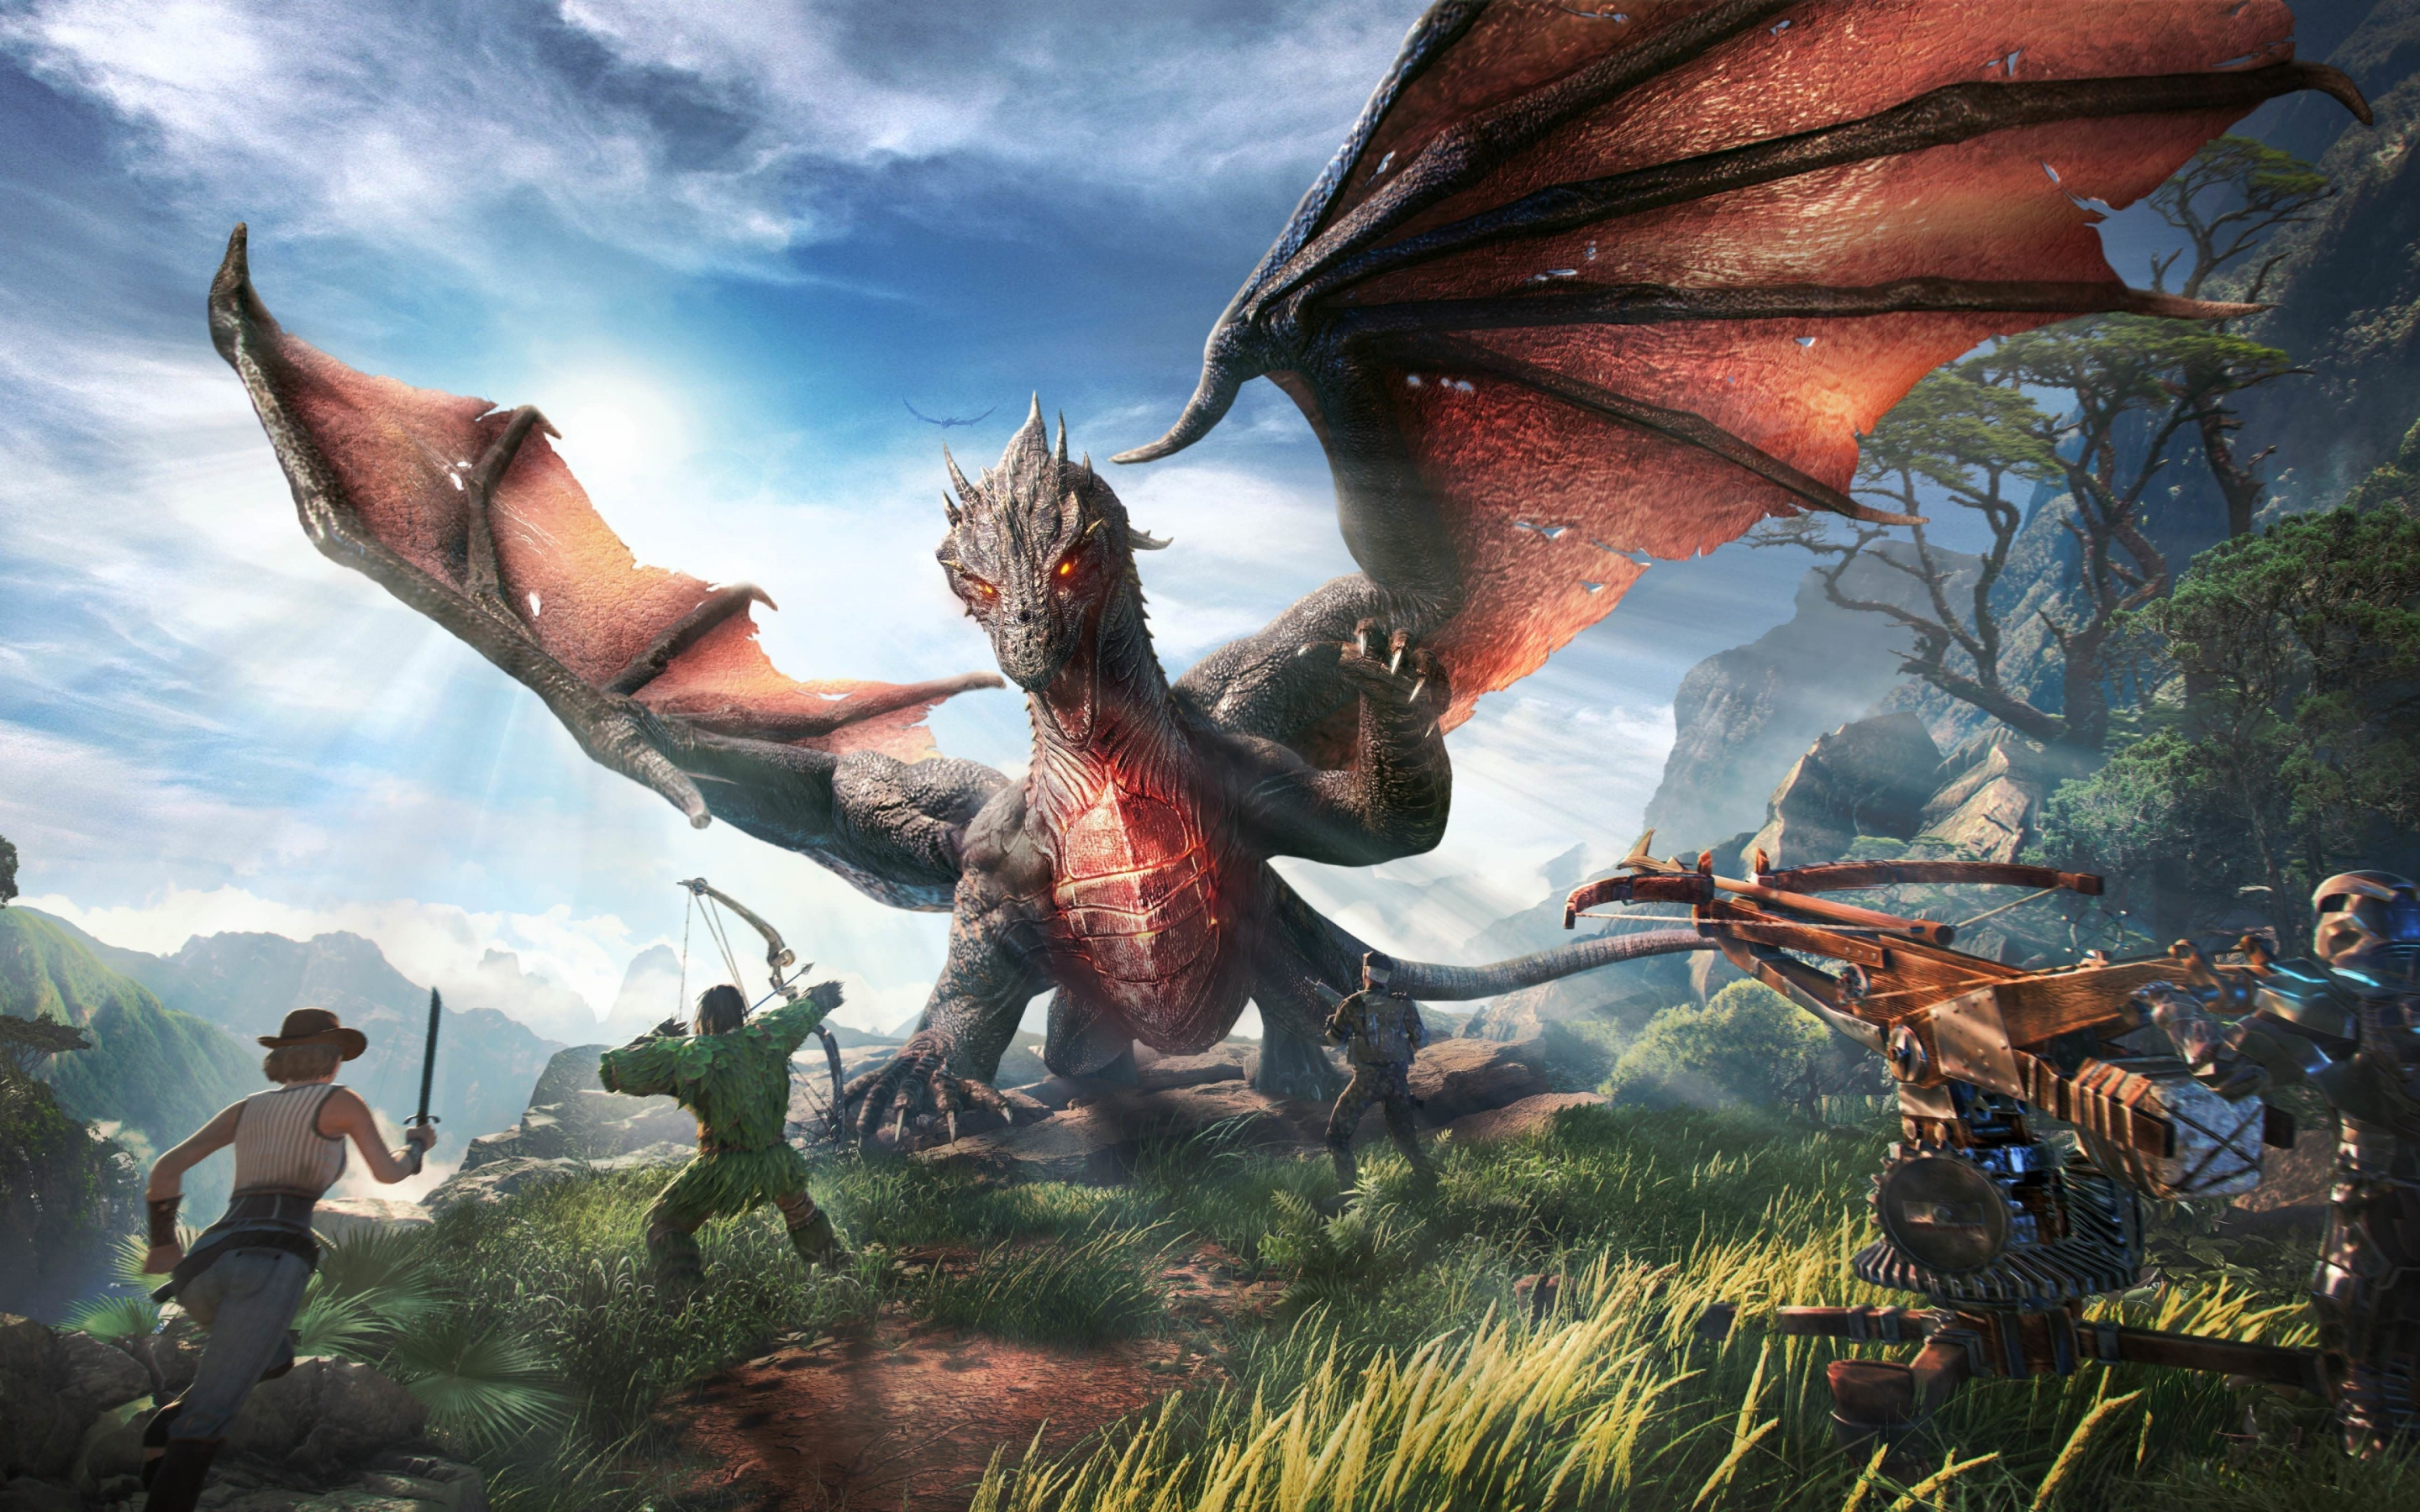 ARK Park, Video game, dragon and warriors, 2018, 2880x1800 wallpaper